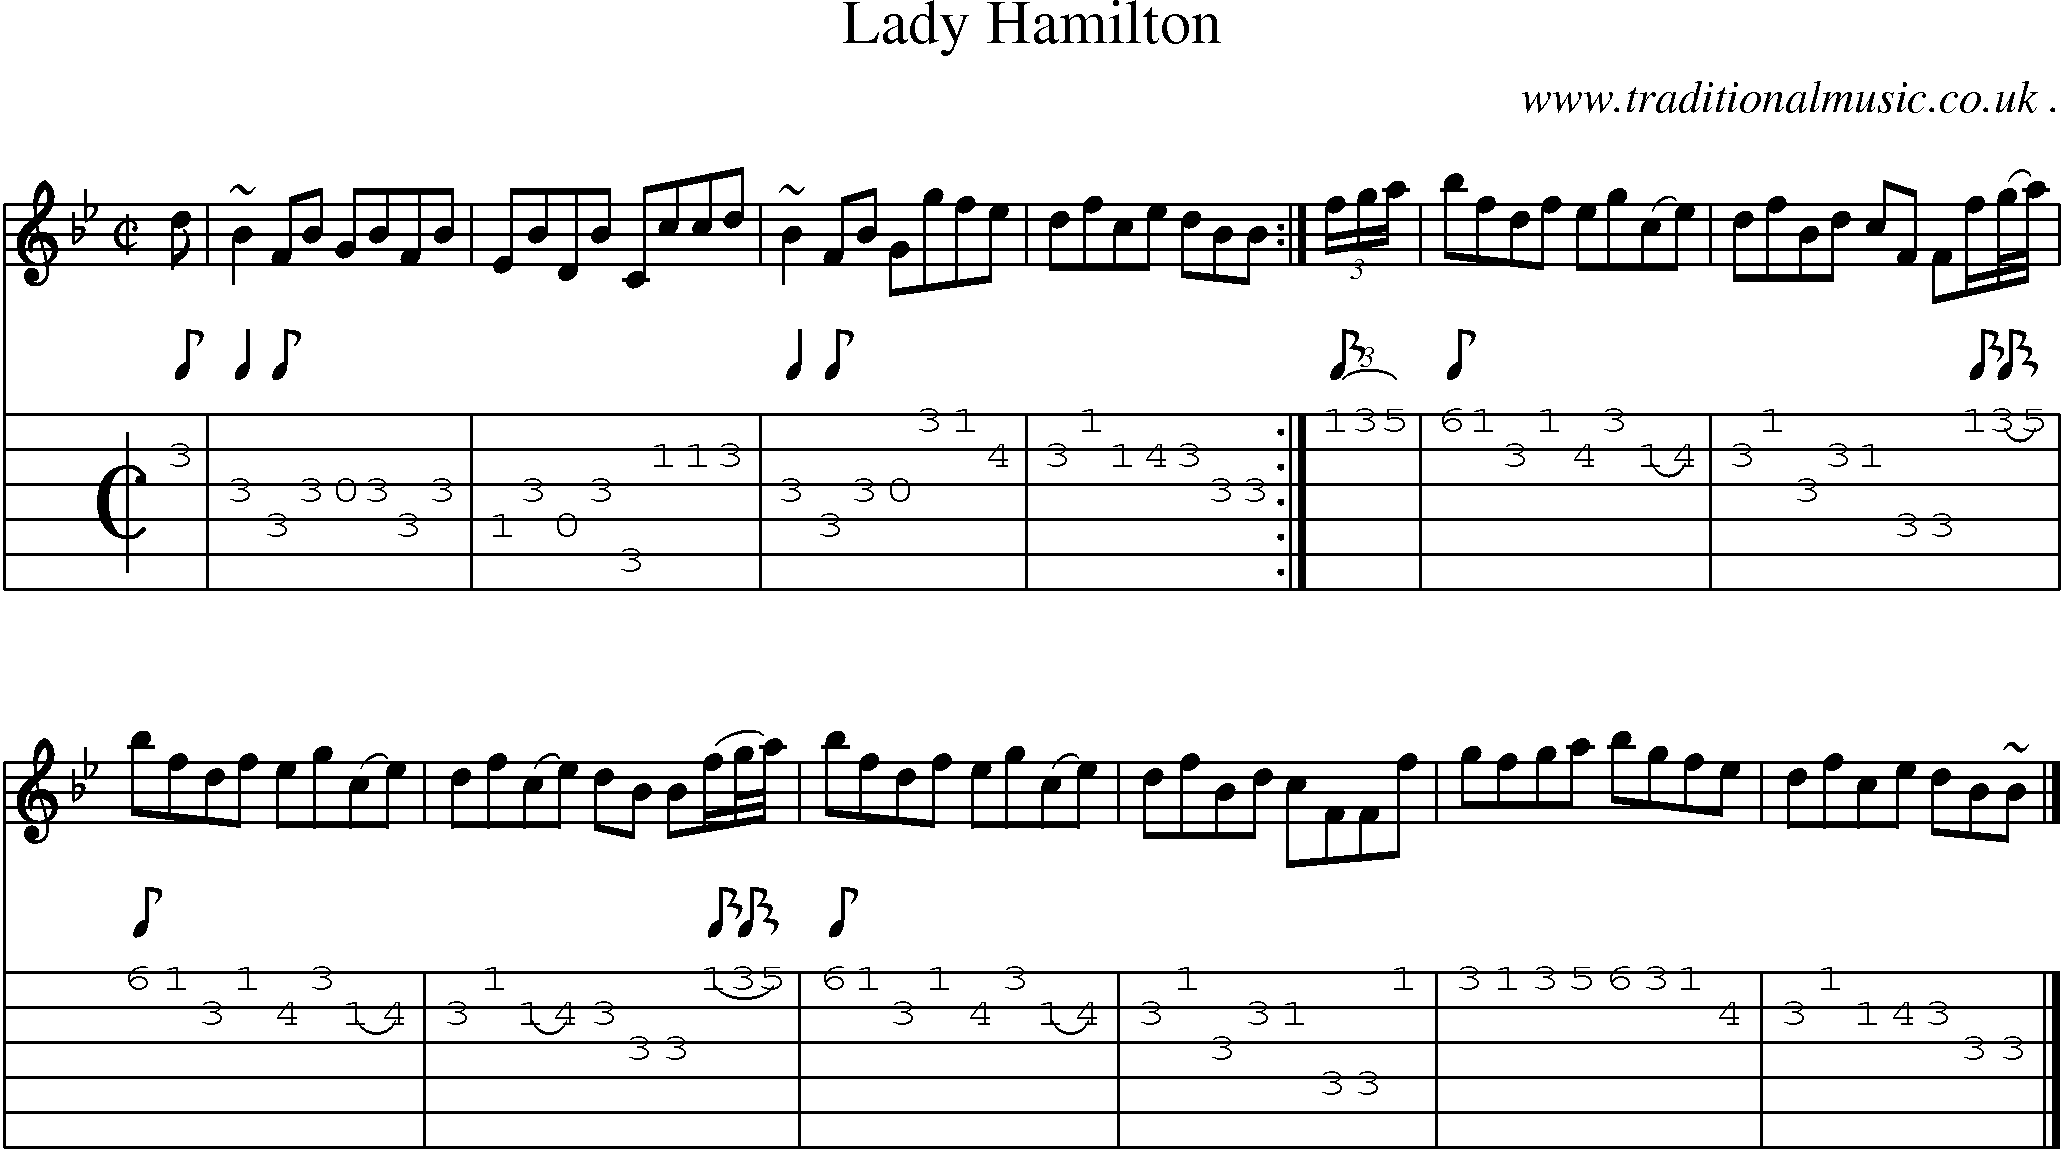 Sheet-music  score, Chords and Guitar Tabs for Lady Hamilton